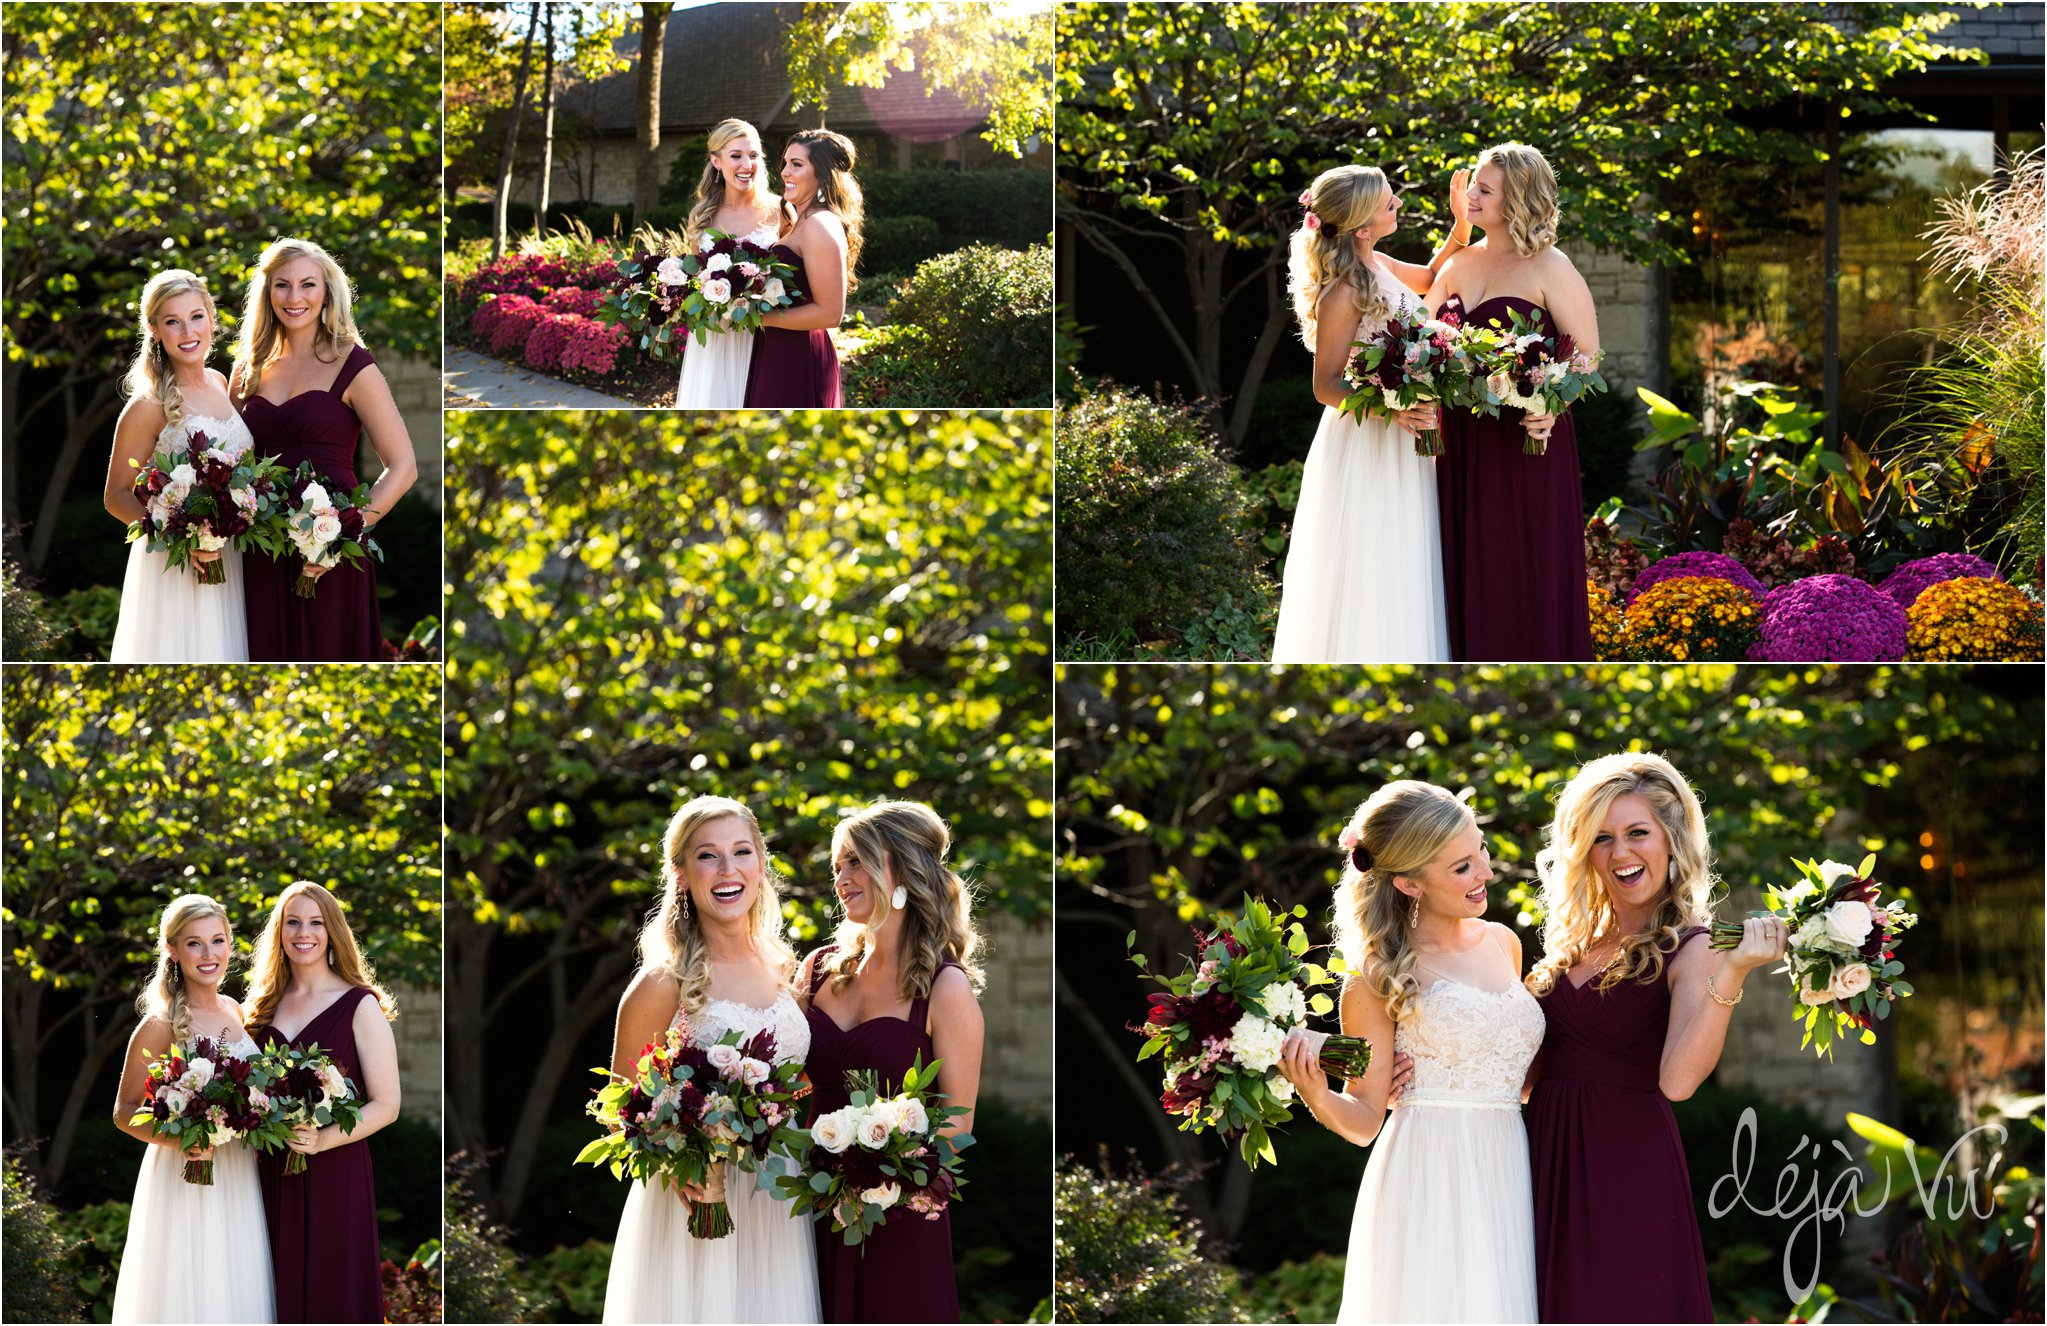 Shadow Glen Country Club Wedding | silly bridesmaids | Images by: www.feliciathephotographer.com